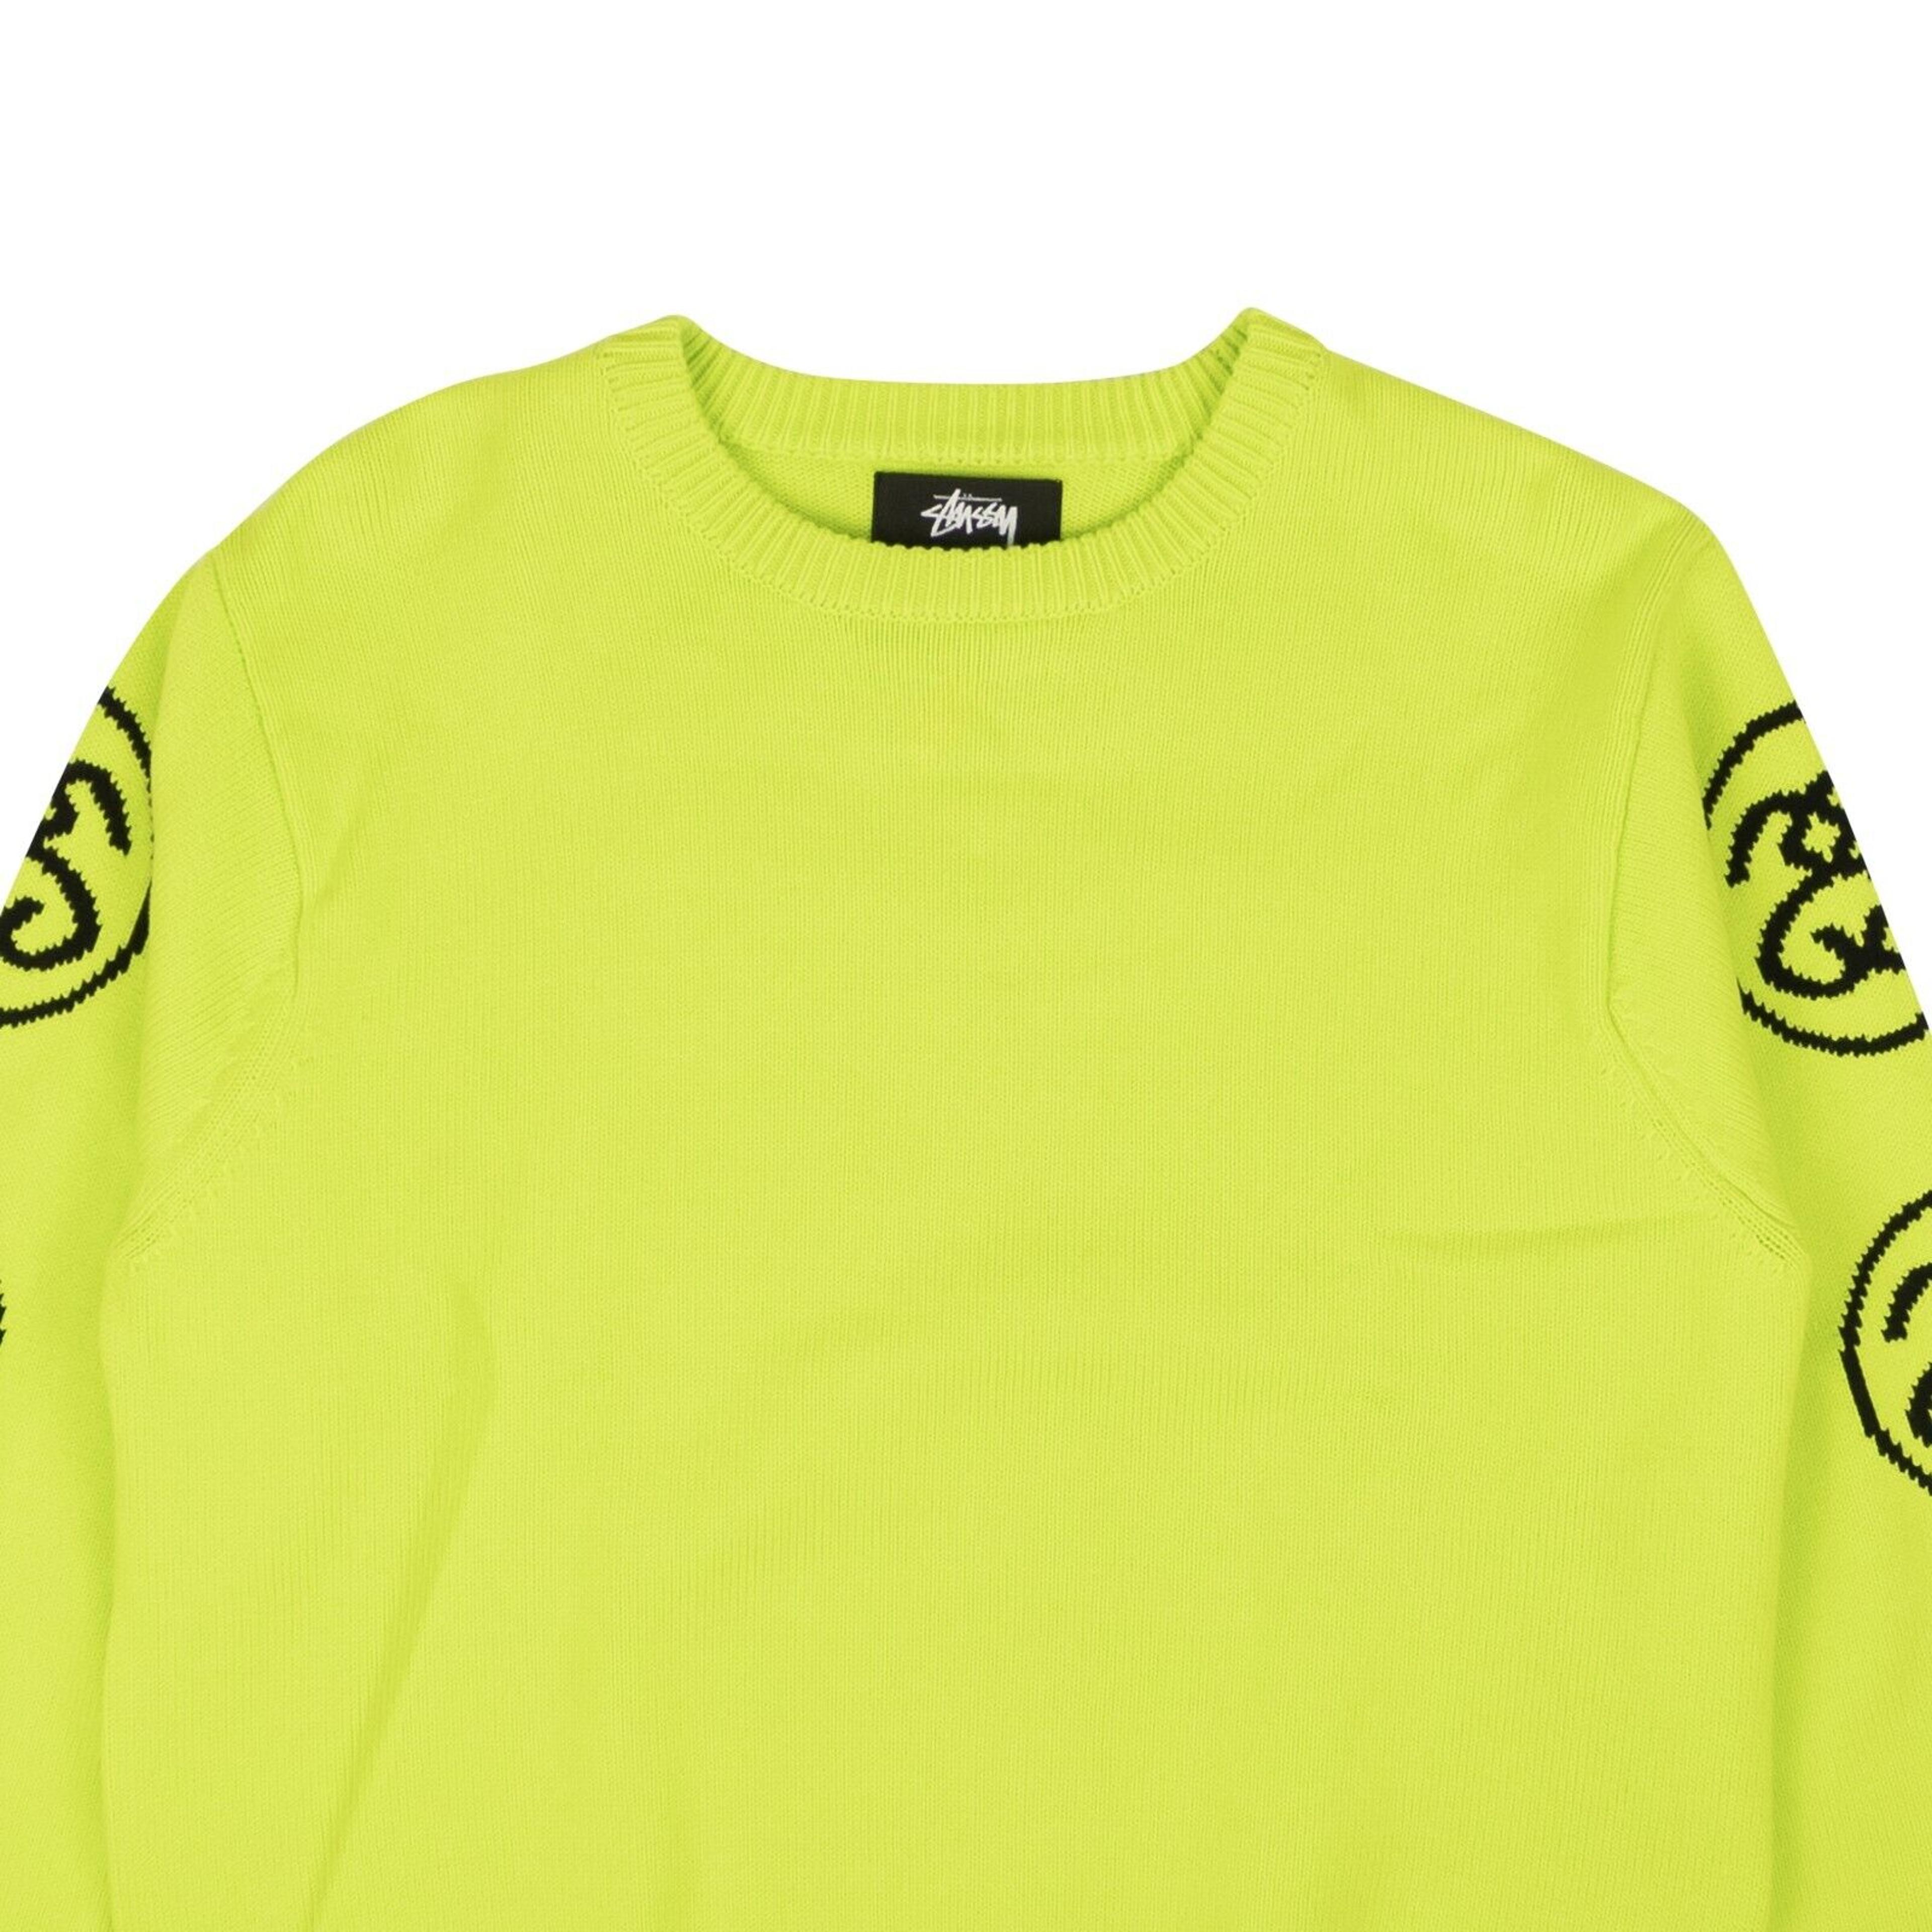 Alternate View 1 of Lime Green Cotton SS-Link Crewneck Sweater